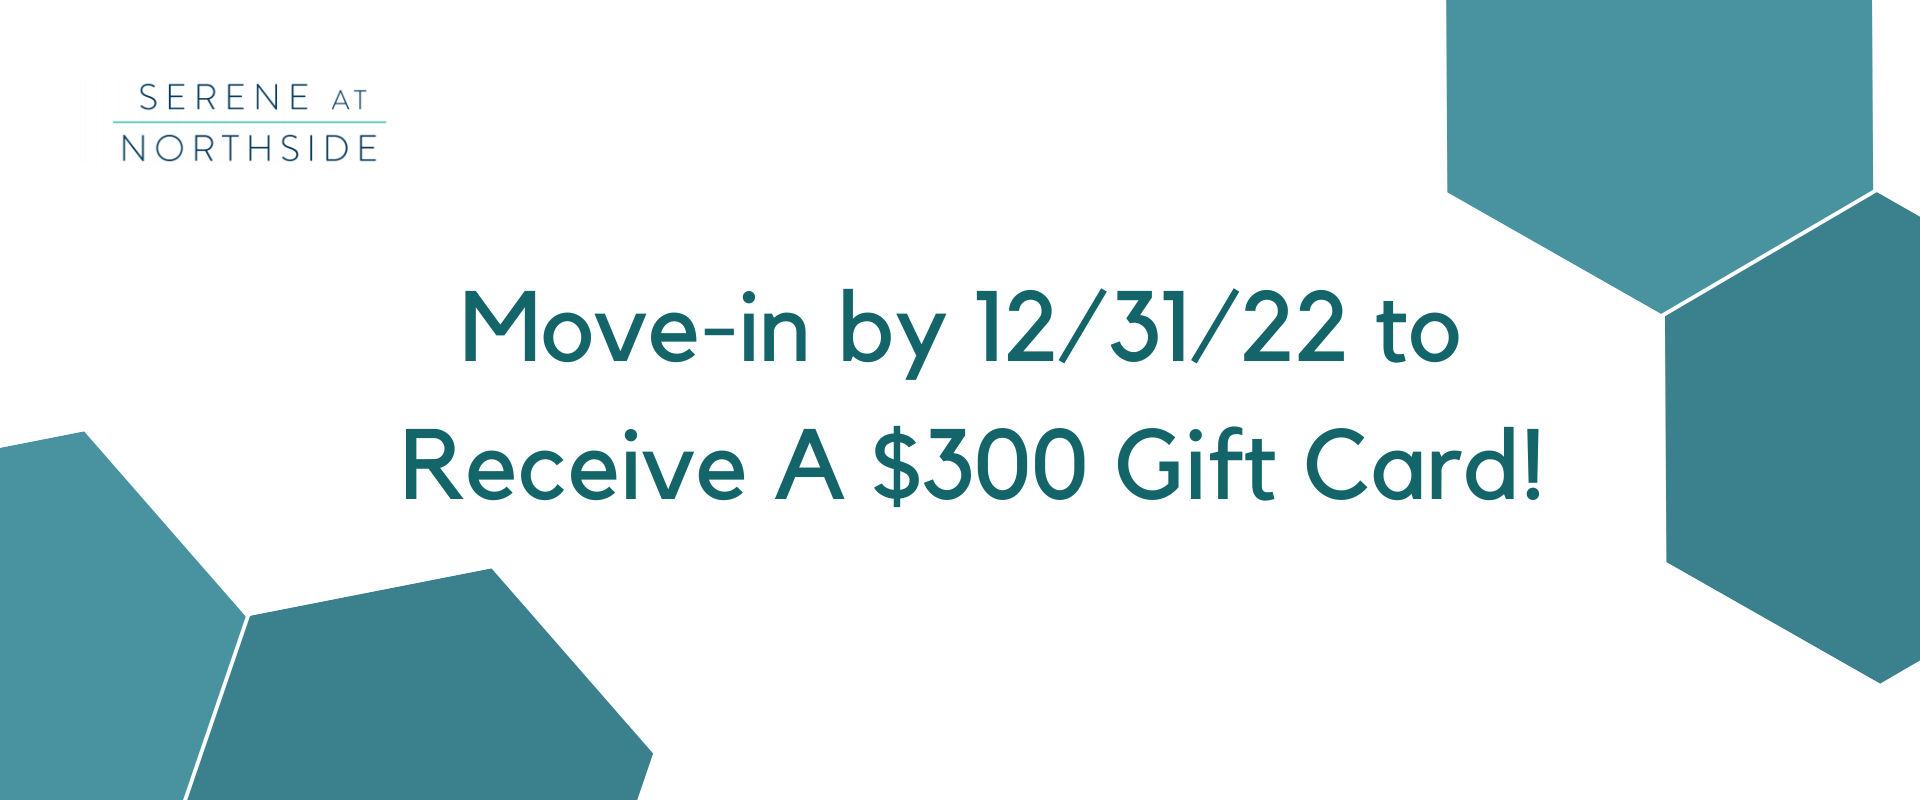 Move-in by 12/31/22 to
 Receive A $300 Gift Card!